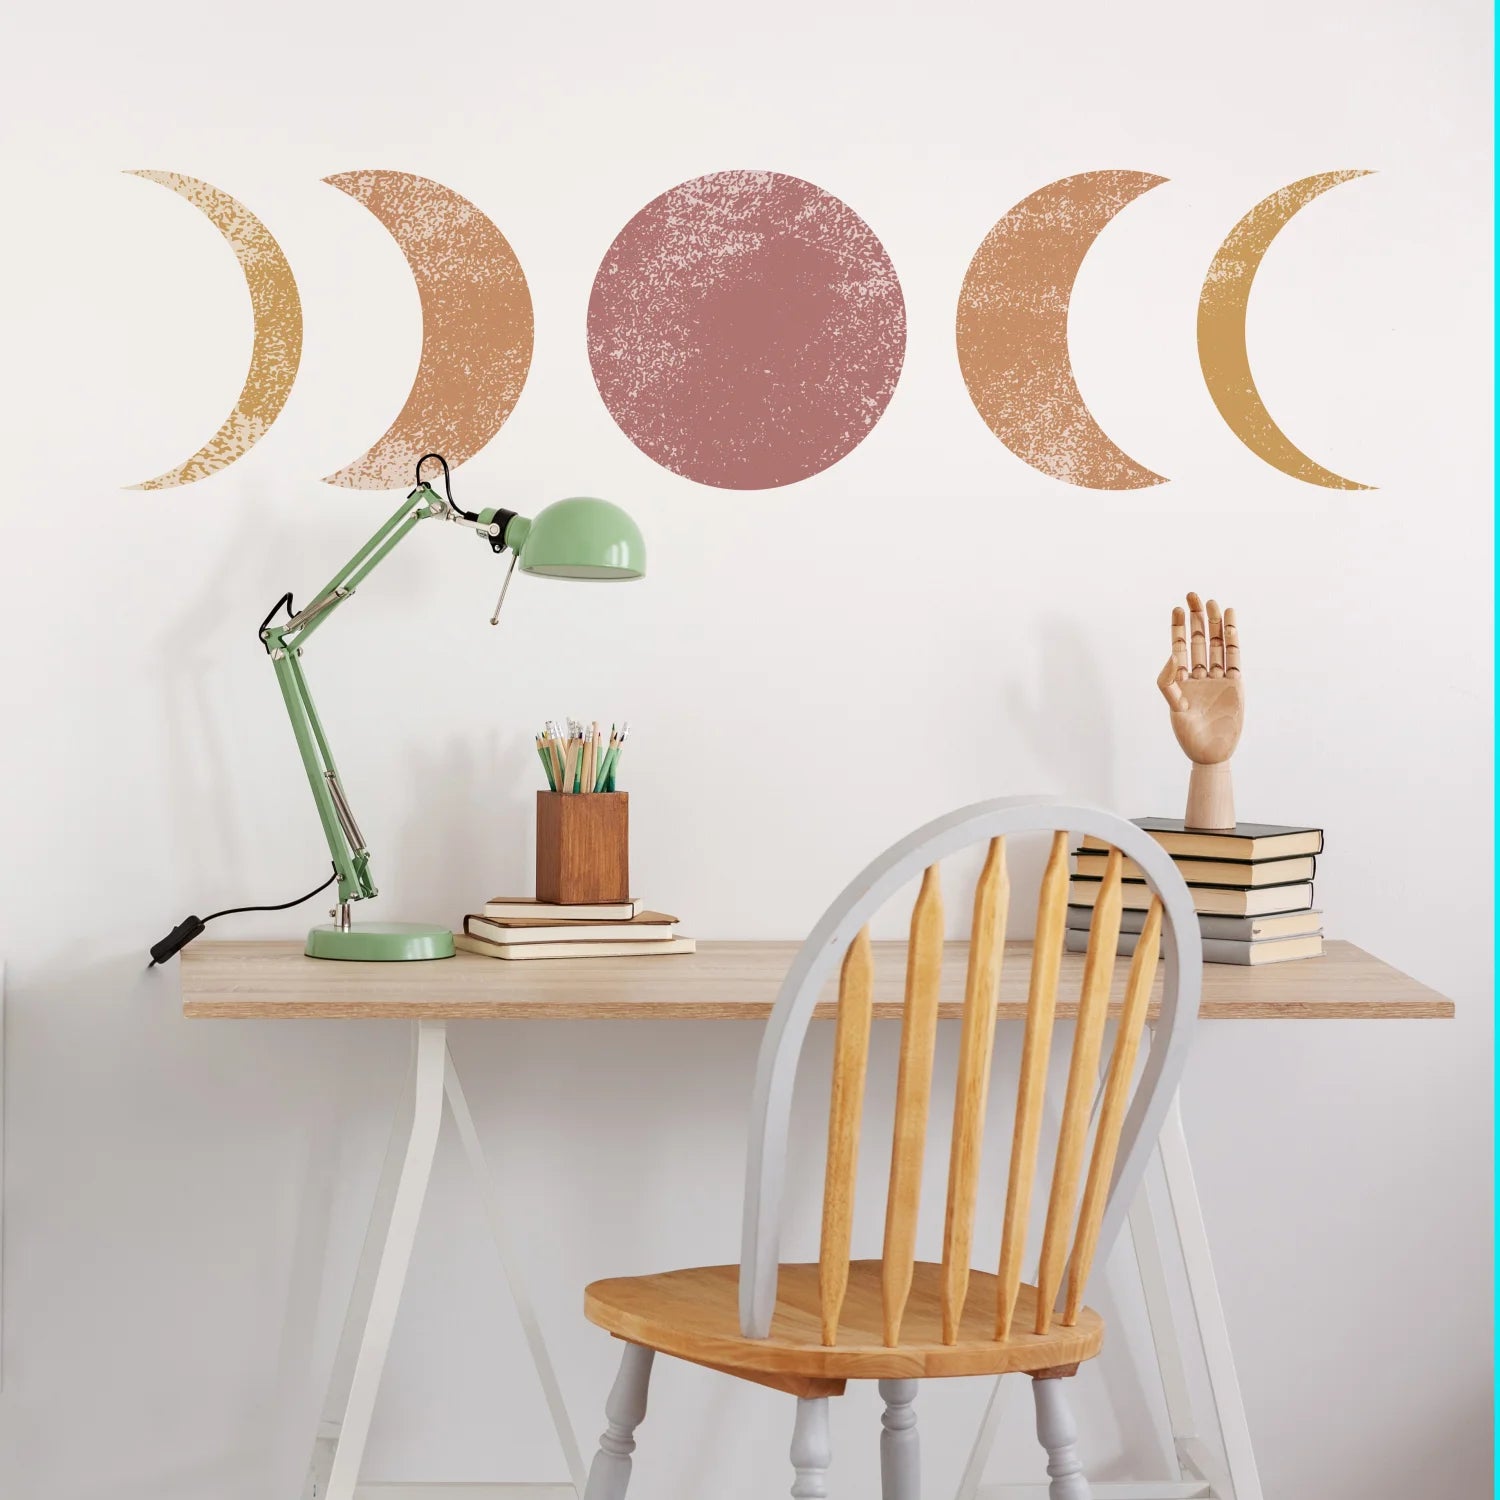 Red Moonscape Fabric Wall Decal - Decals Big Features